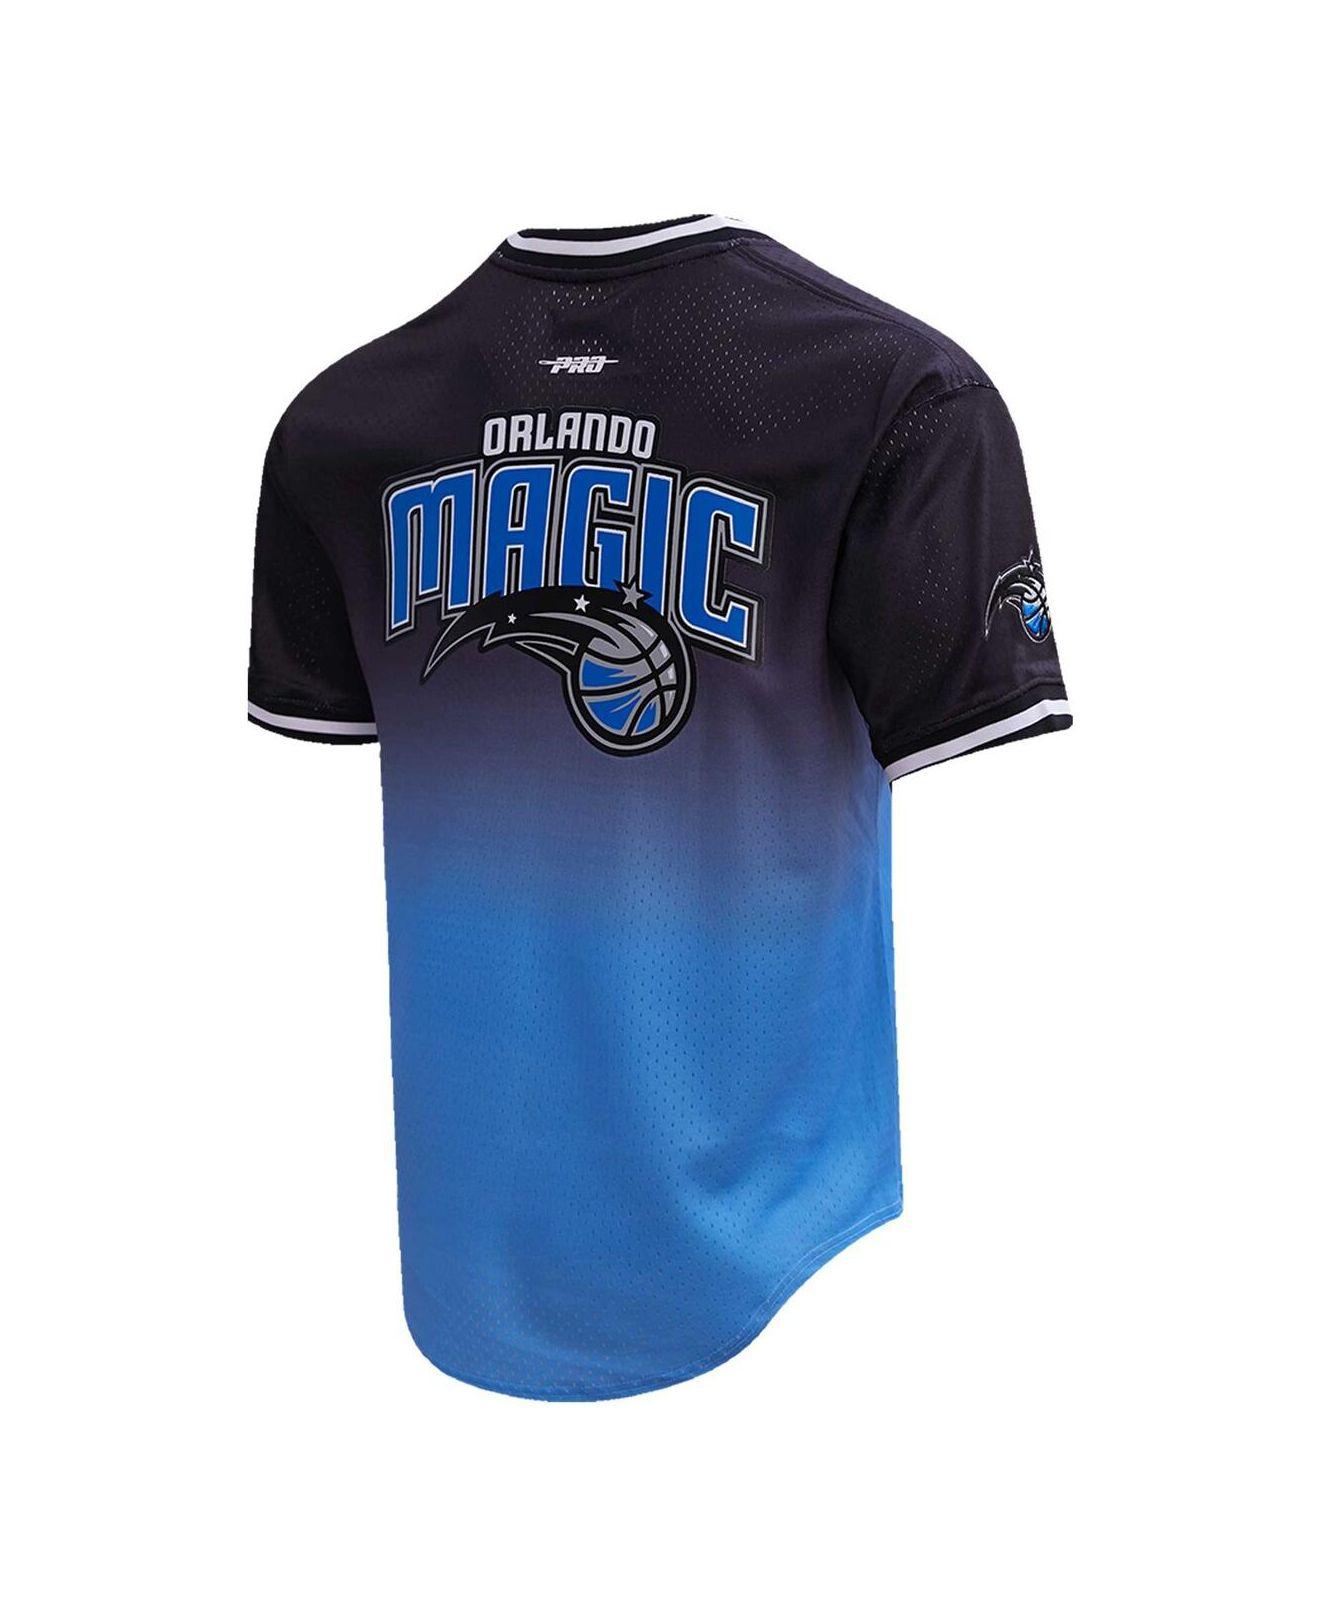 Paolo Banchero's Orlando Magic jersey now for sale 